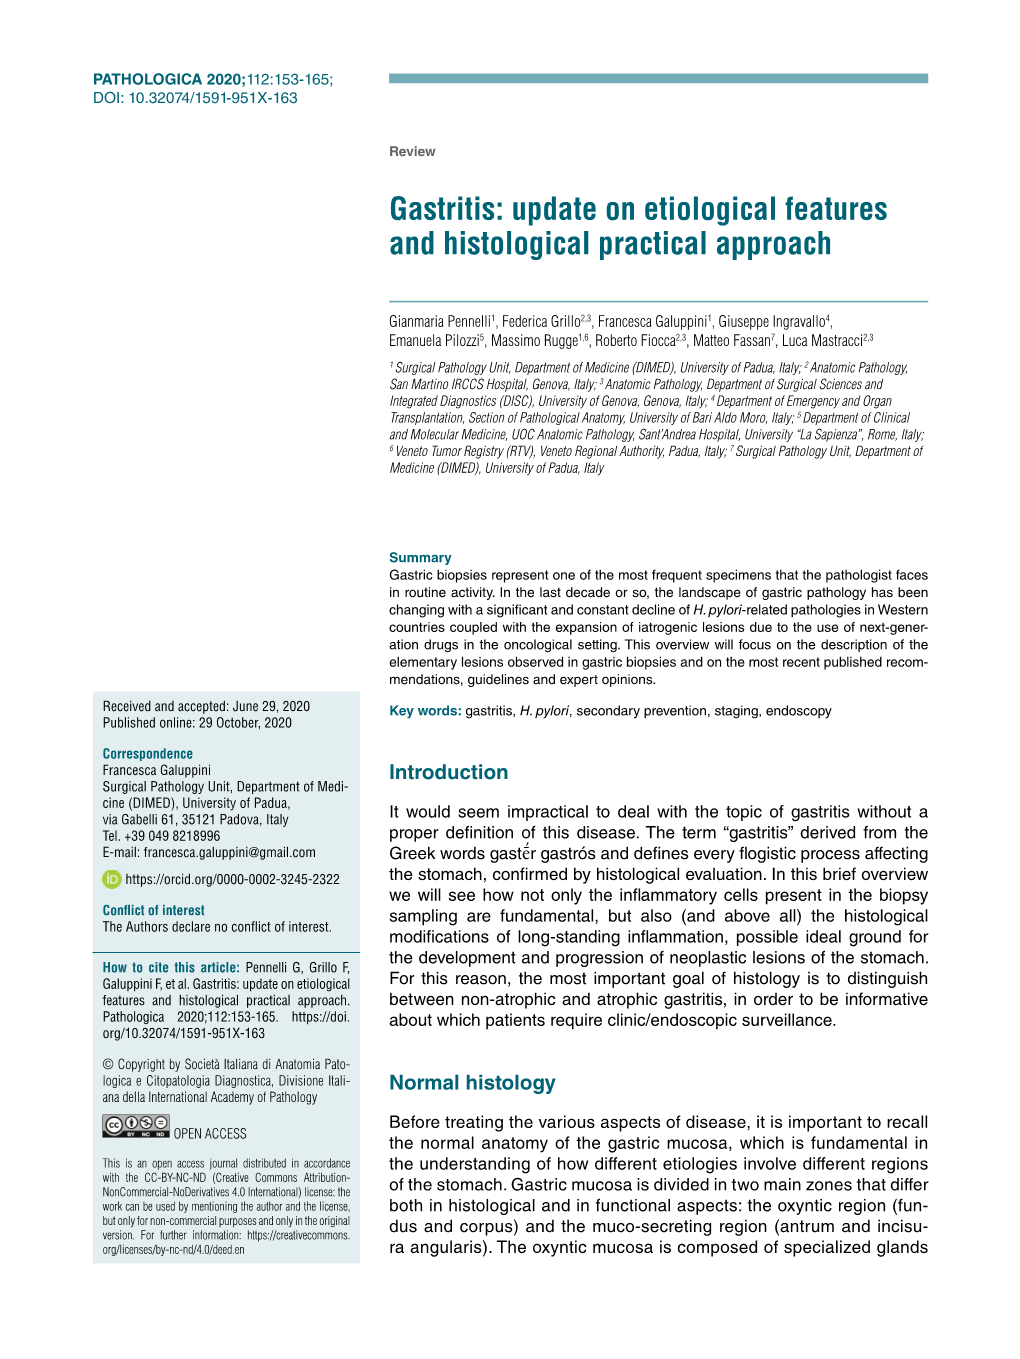 Gastritis: Update on Etiological Features and Histological Practical Approach